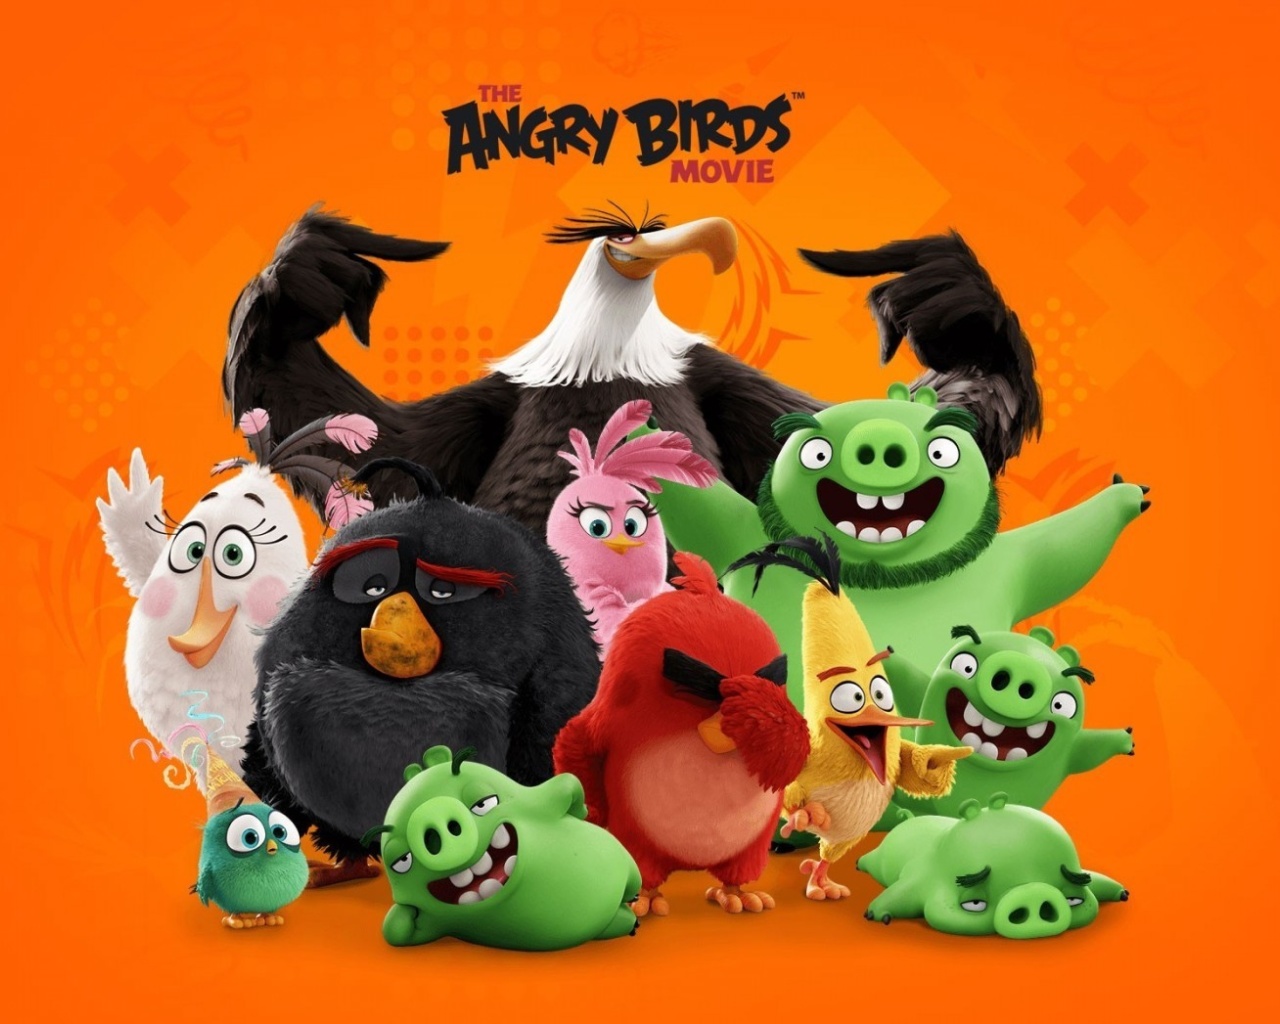 Angry Birds the Movie Release by Rovio wallpaper 1280x1024